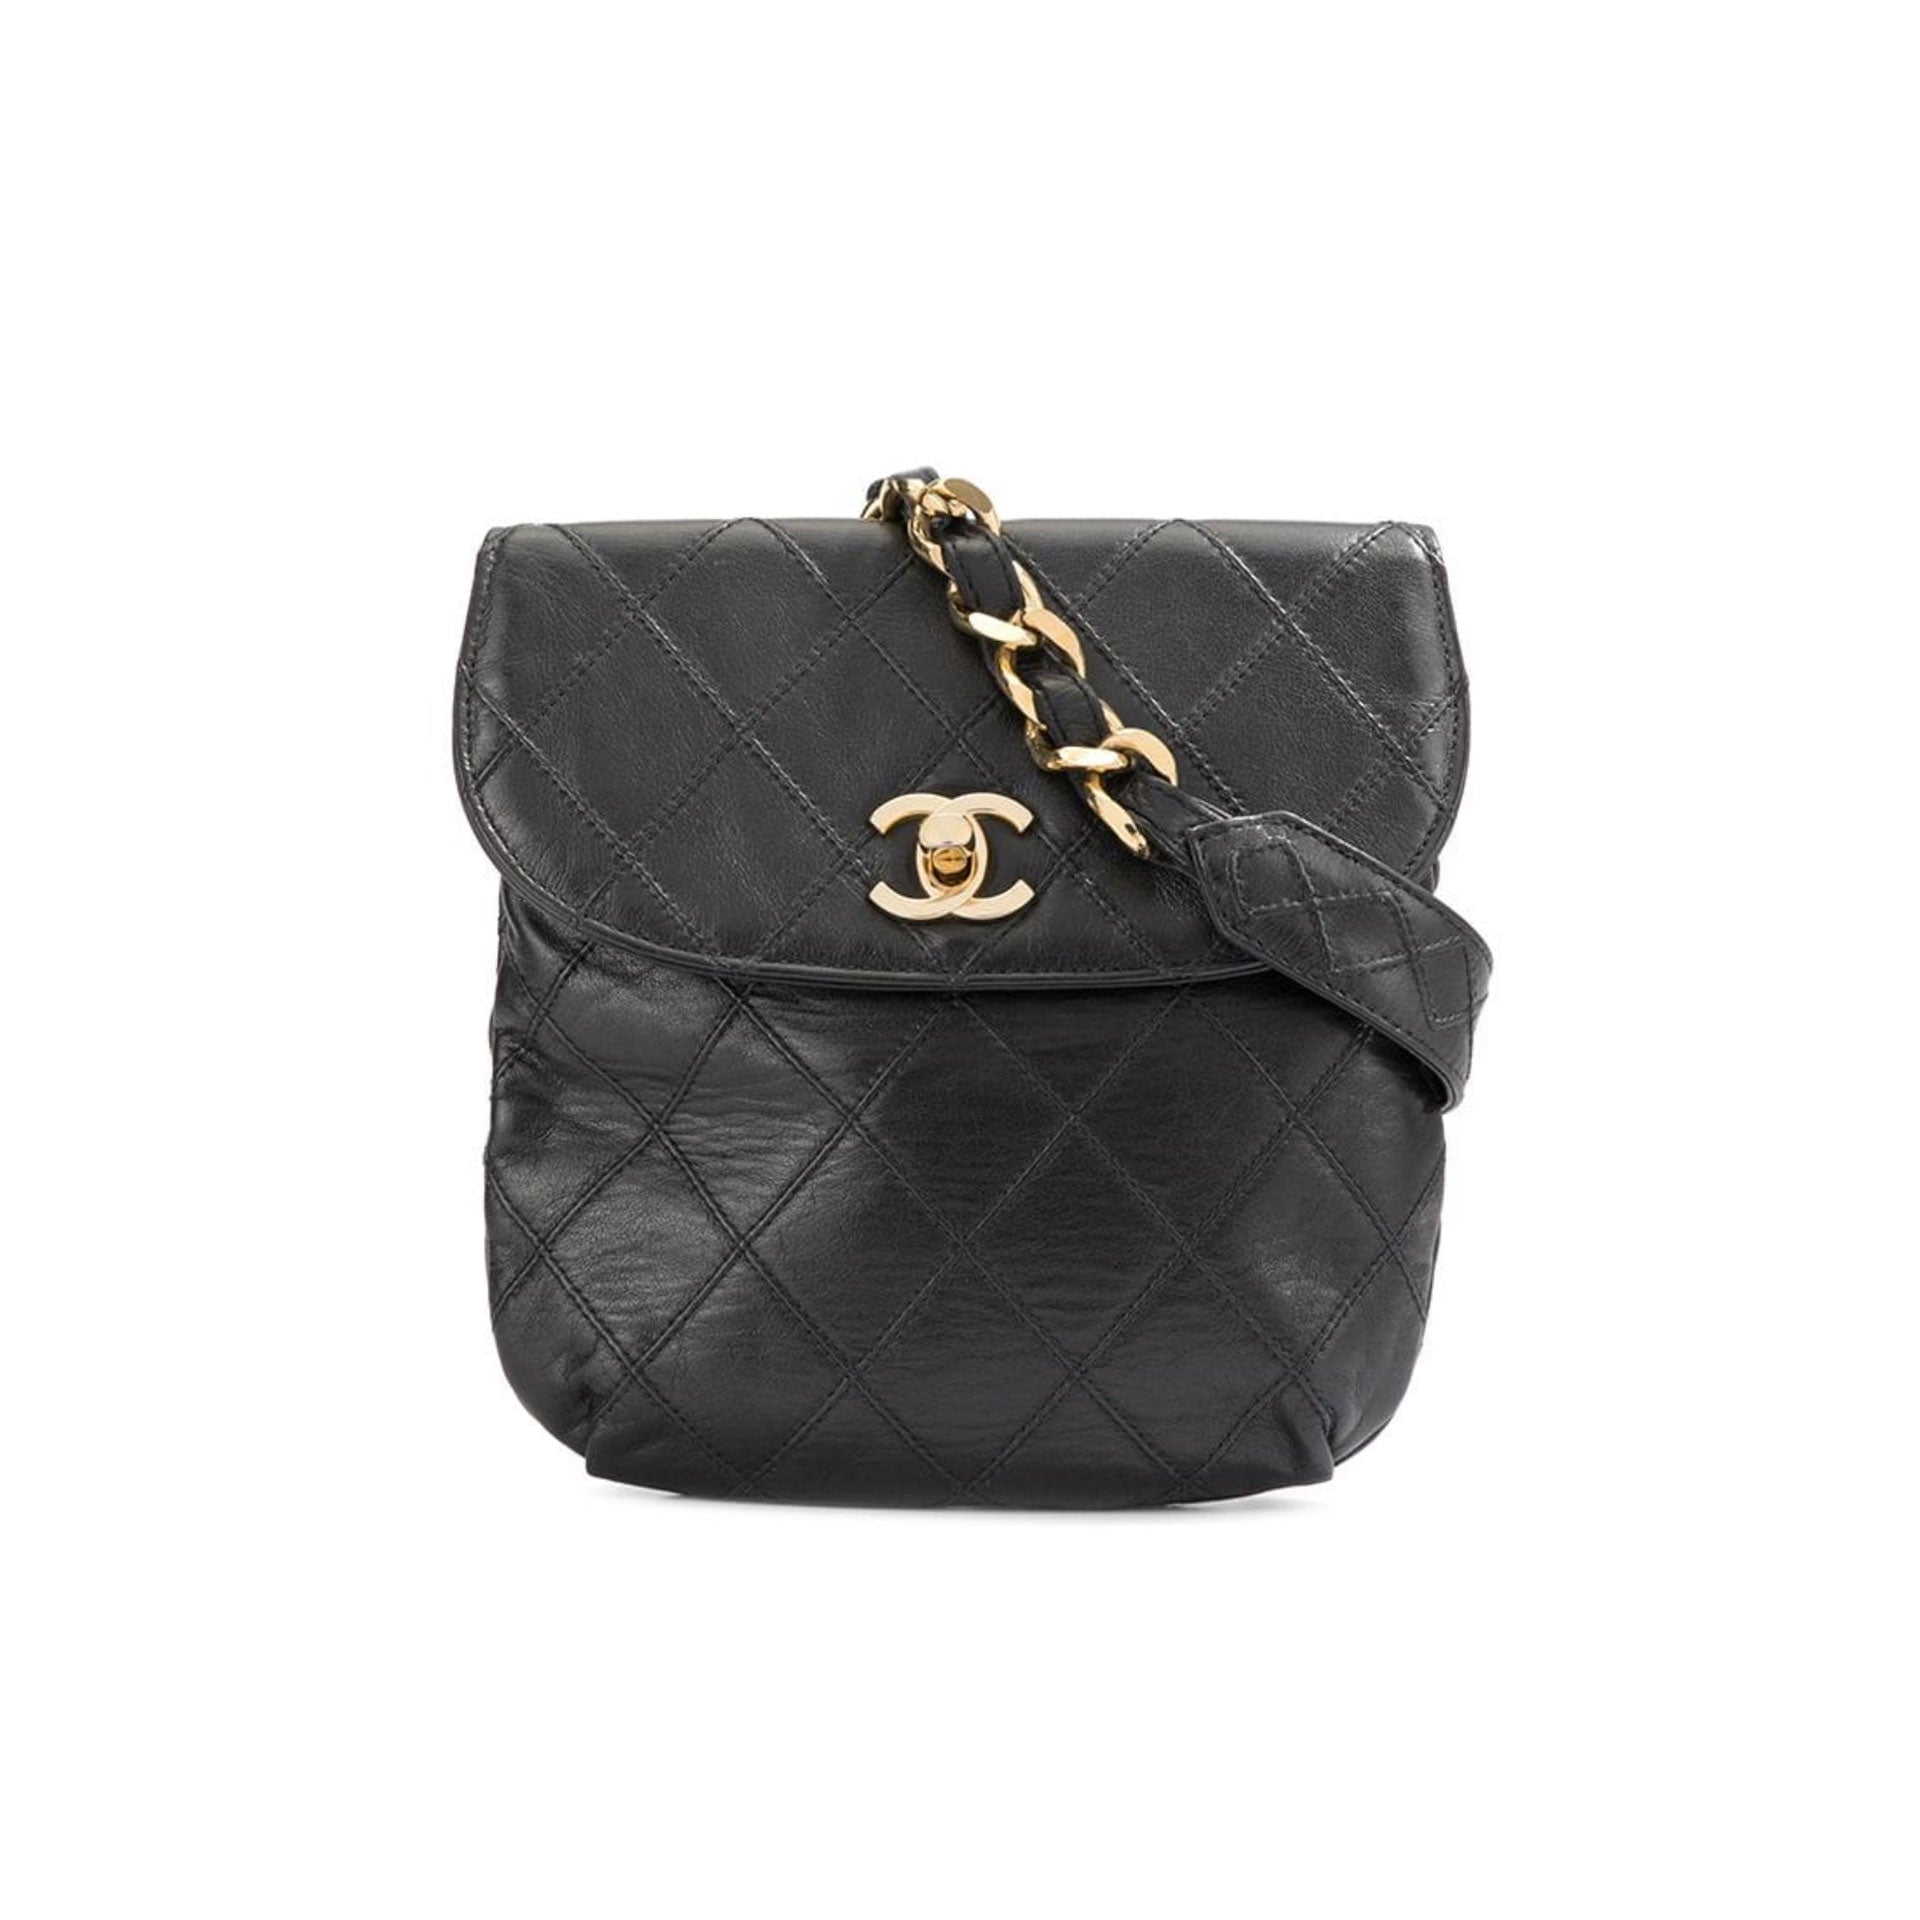 Chanel Quilted Leather Waist Bag - Black Waist Bags, Handbags